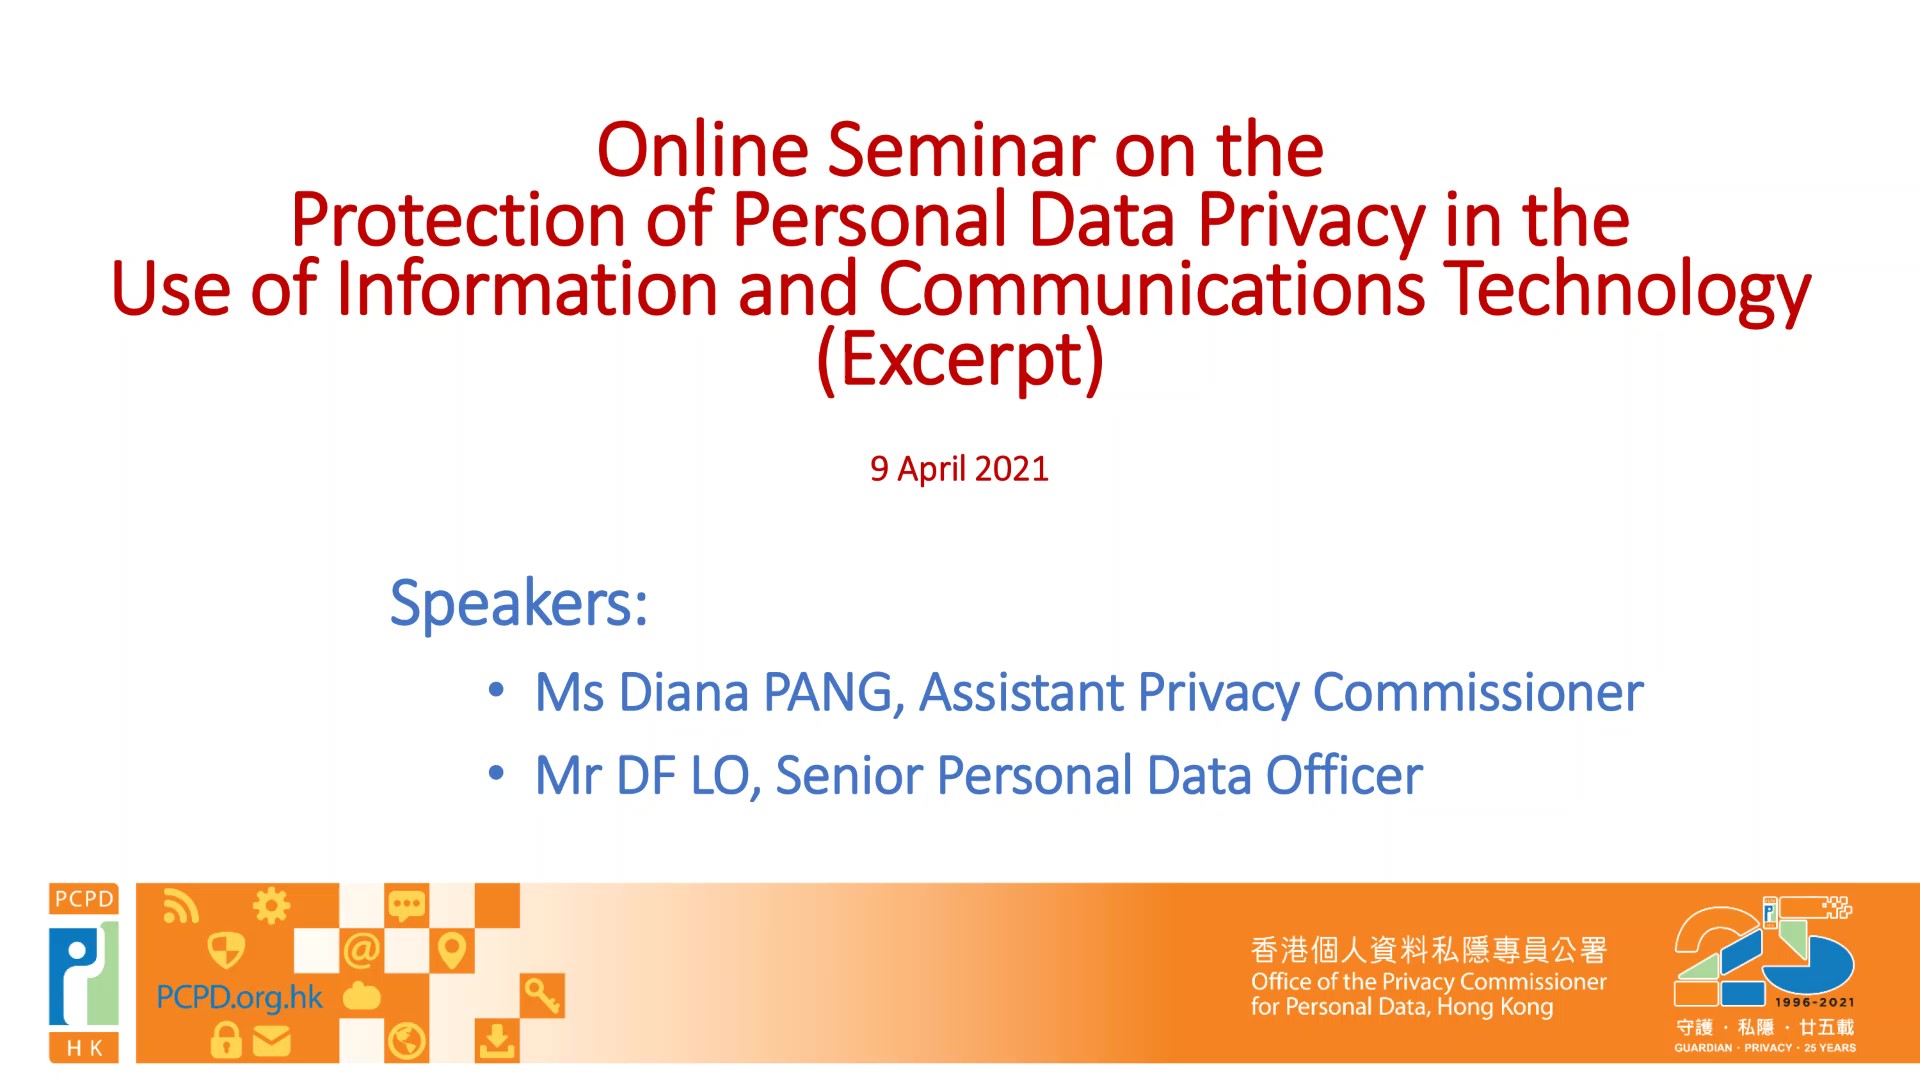 Online Seminar on Schools' Collection and Use of Personal Data during COVID-19 Pandemic